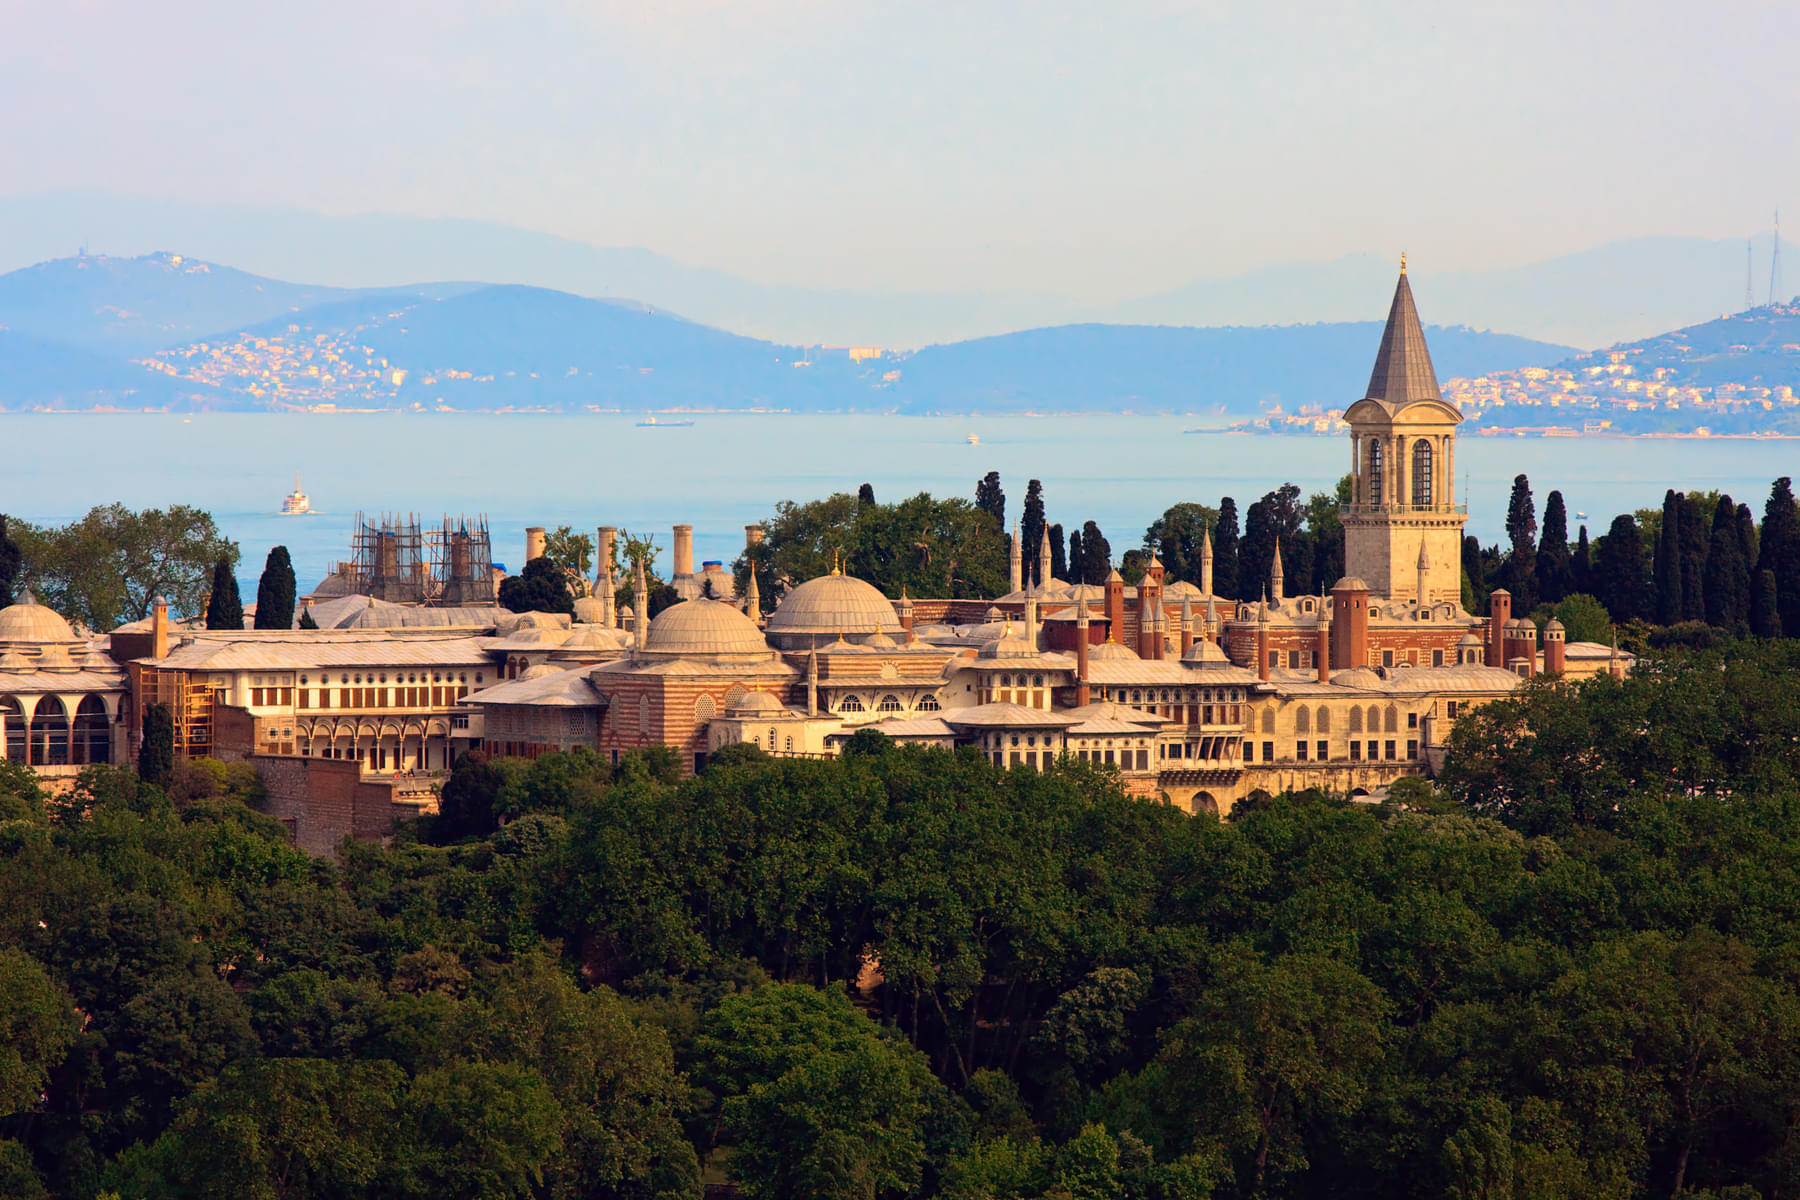 Explore Topkapi Palace, one of the most significant landmark from Ottoman Empire